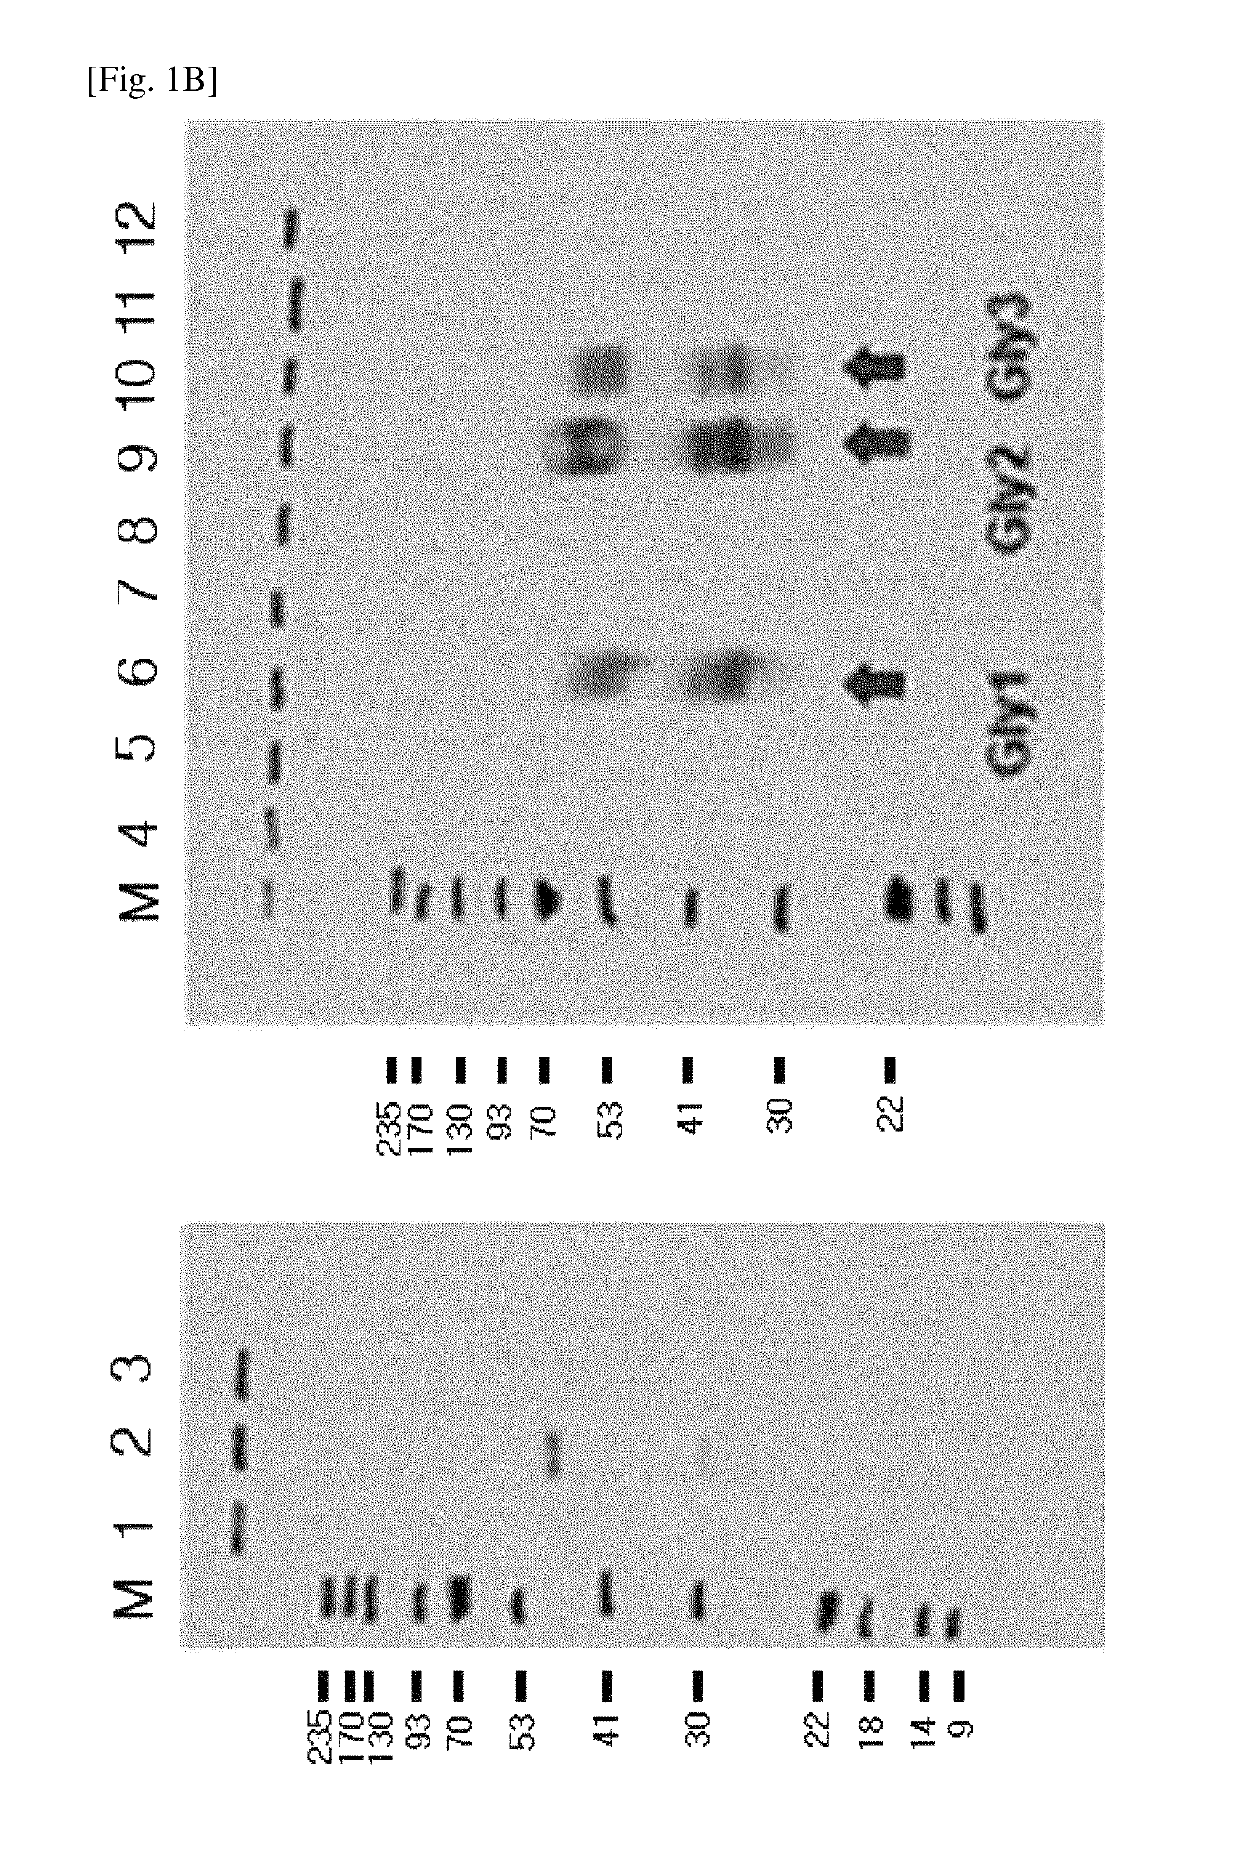 Modified DKK2 protein, nucleic acid encoding the same, preparation method thereof, and use thereof